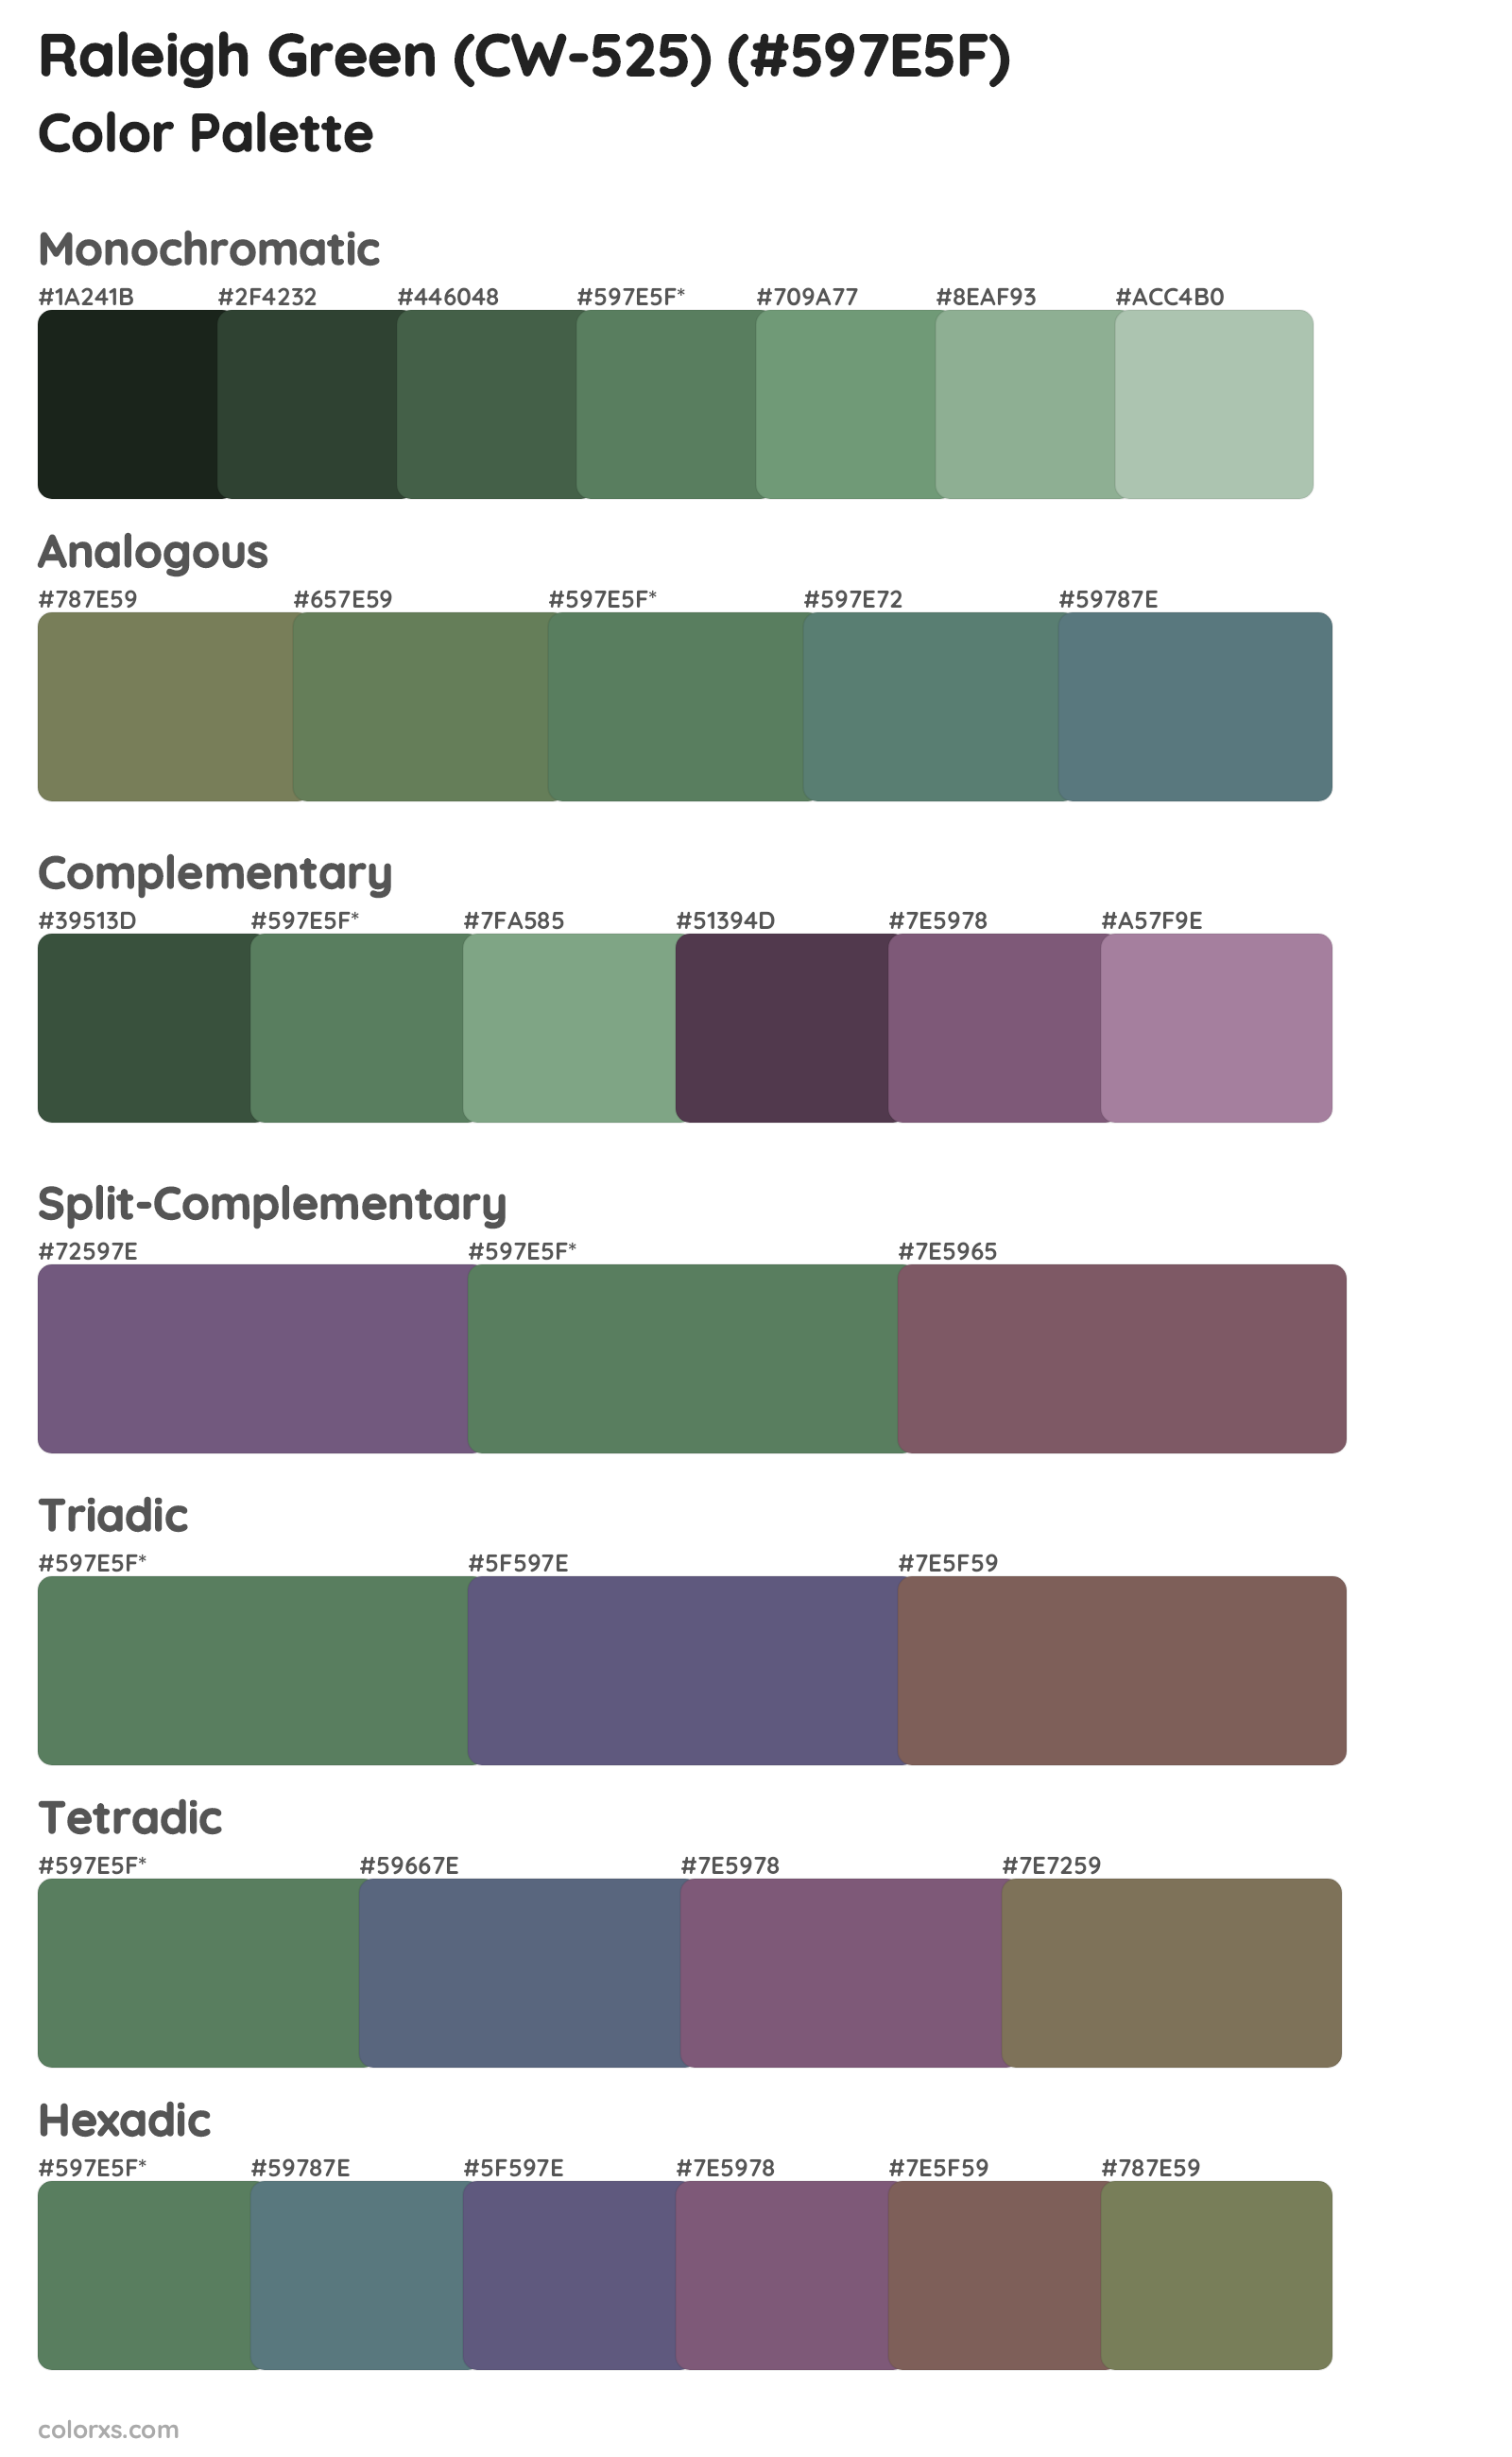 Raleigh Green (CW-525) Color Scheme Palettes